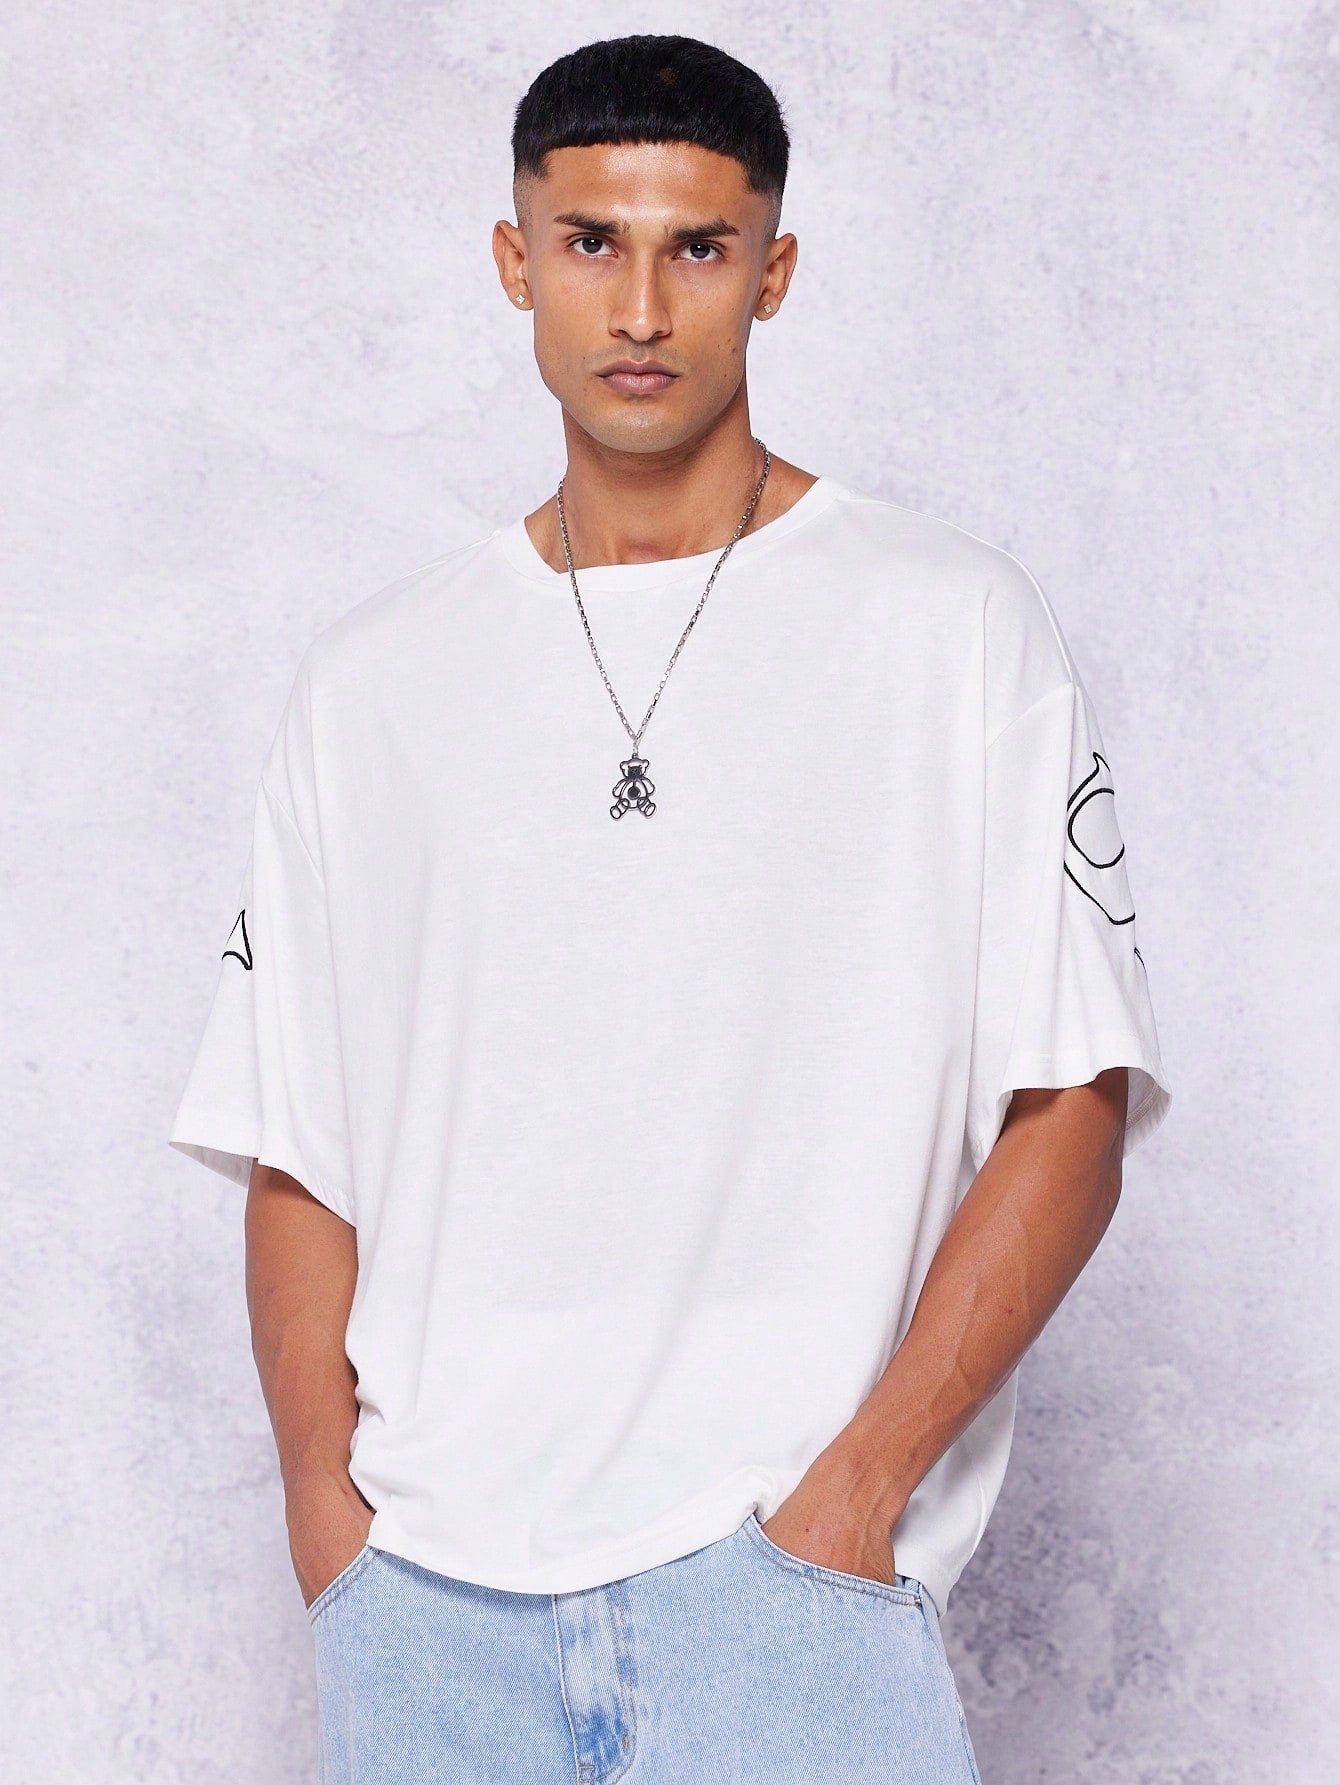 Oversized Fit Tee With Back Logo Embroidery